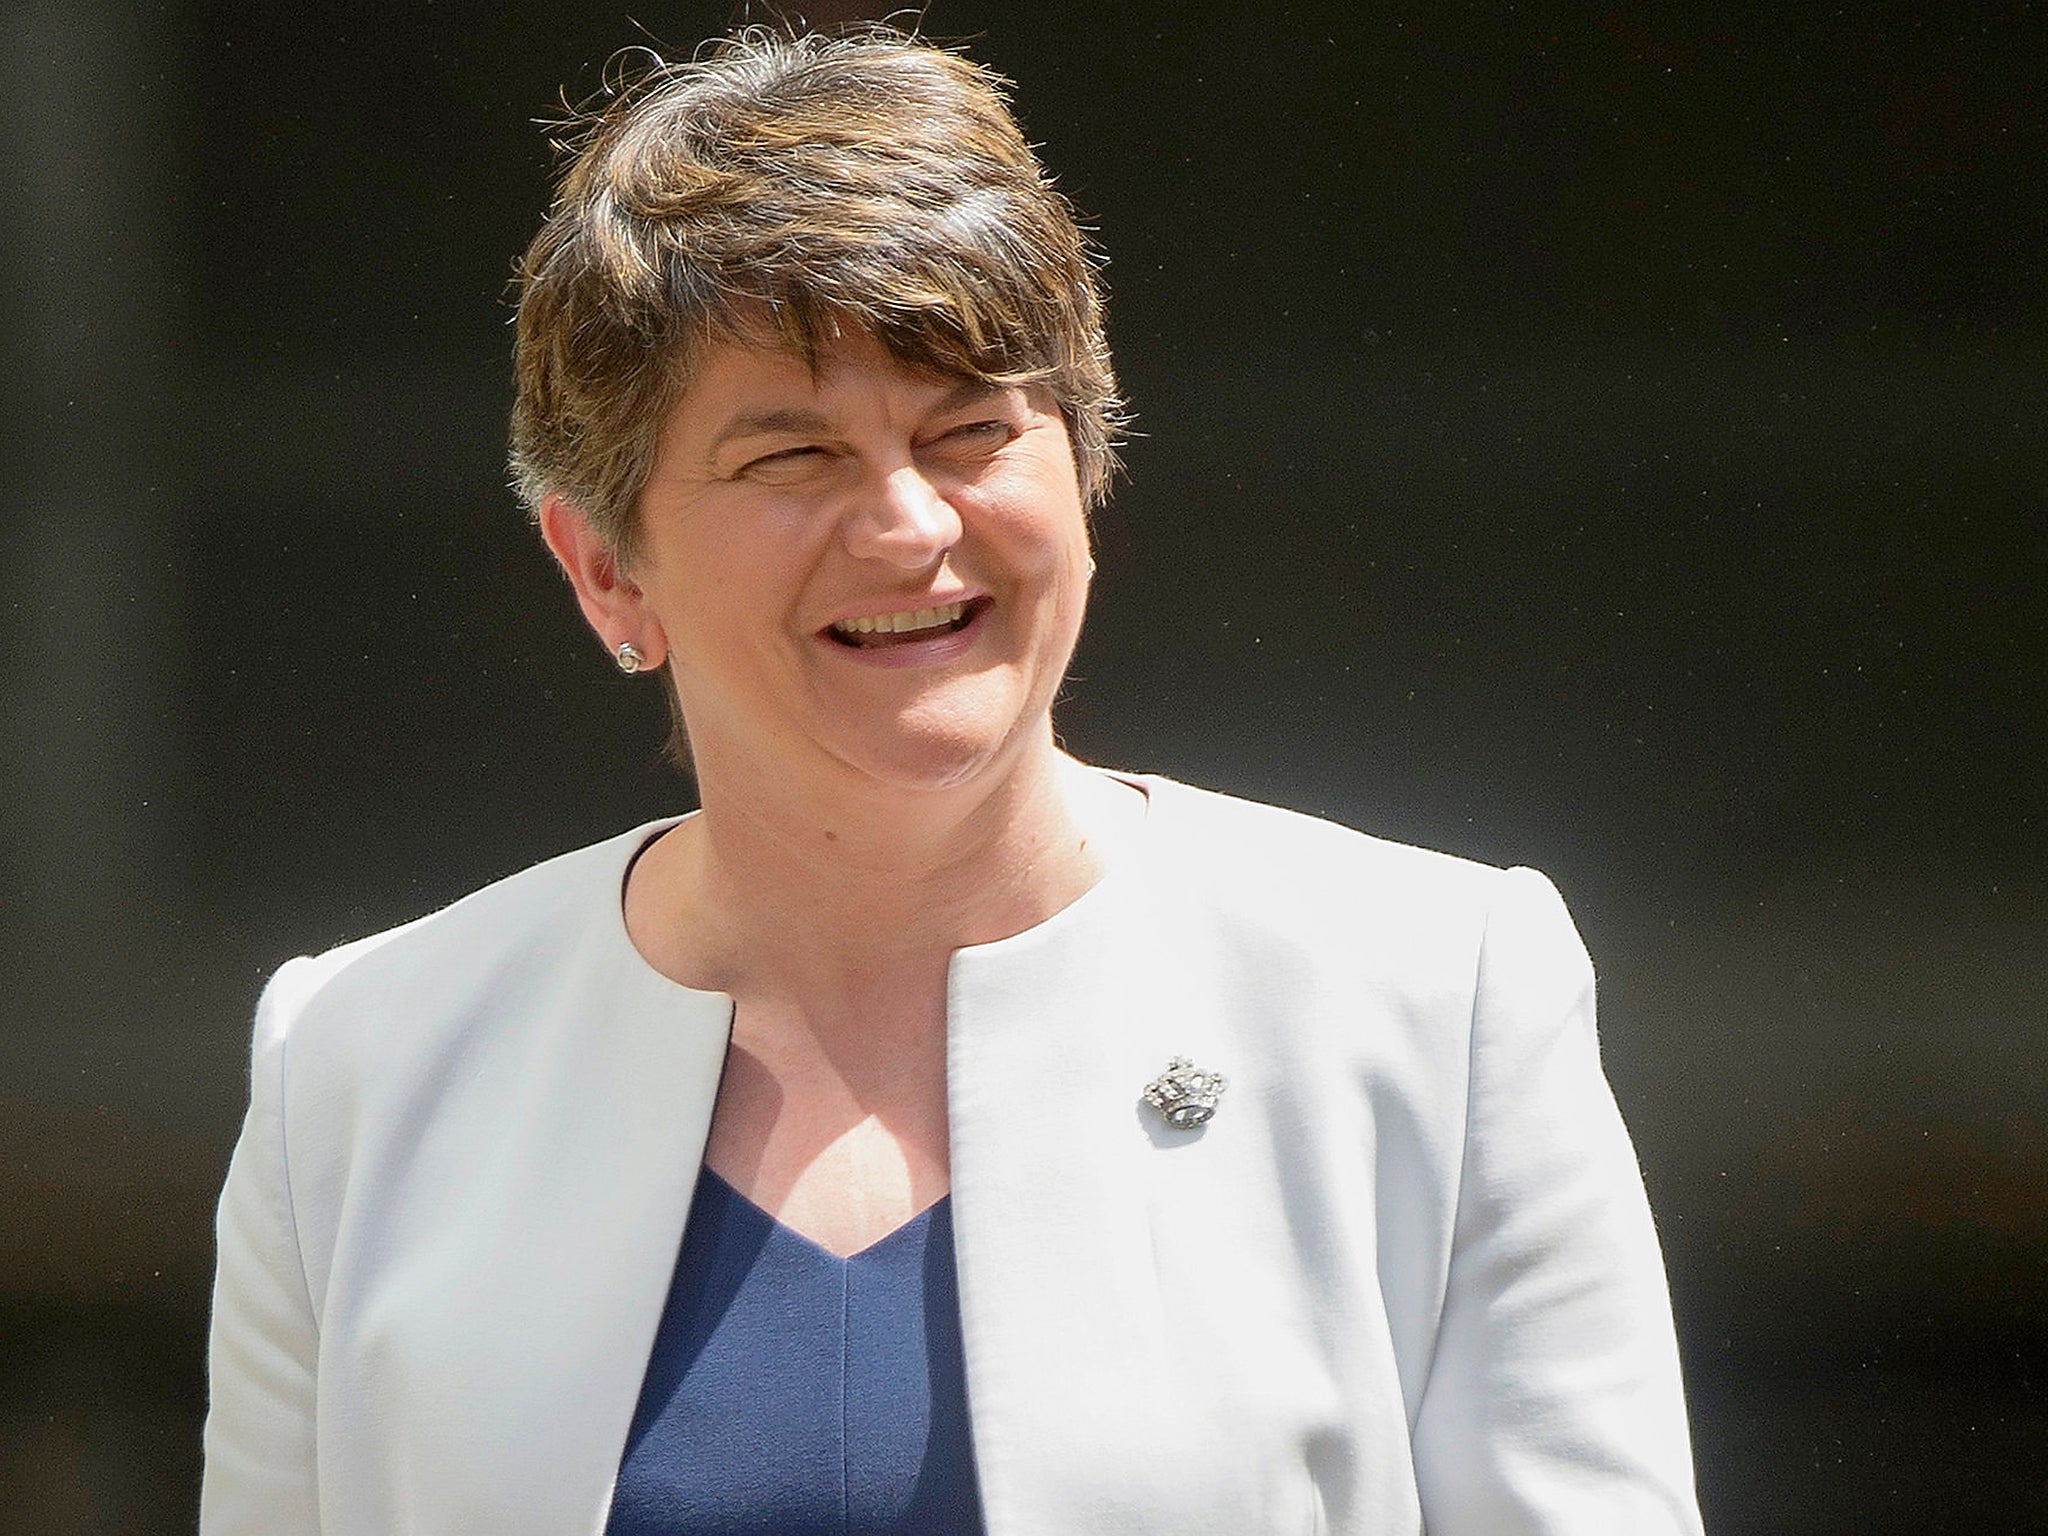 DUP leader Arlene Foster's demands appear to have horrified the Treasury